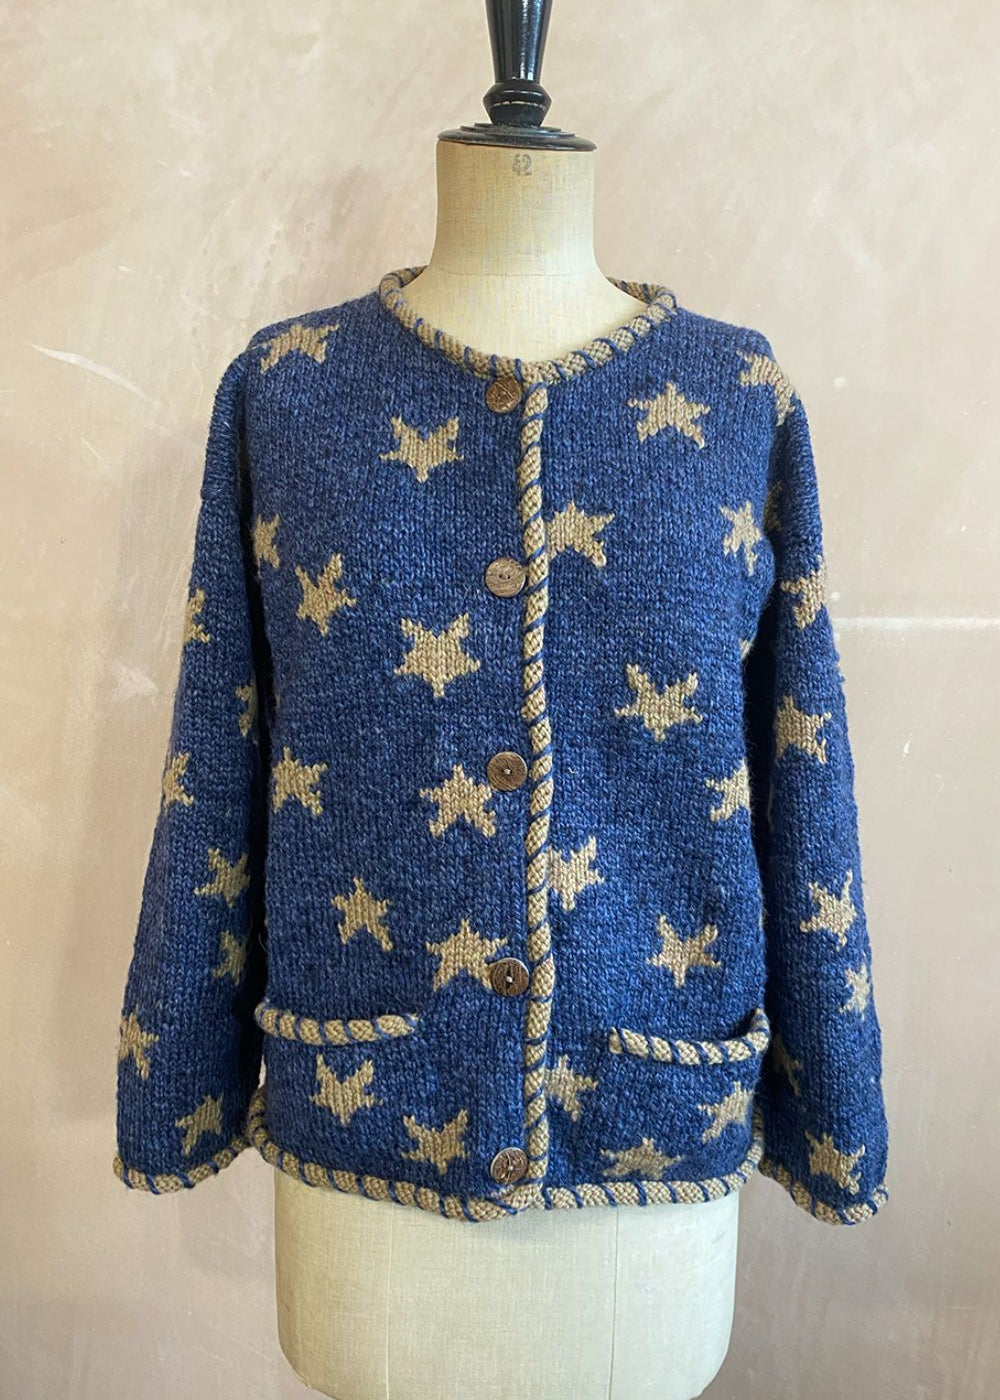 Amano Star Cardigan showing buttons and trim